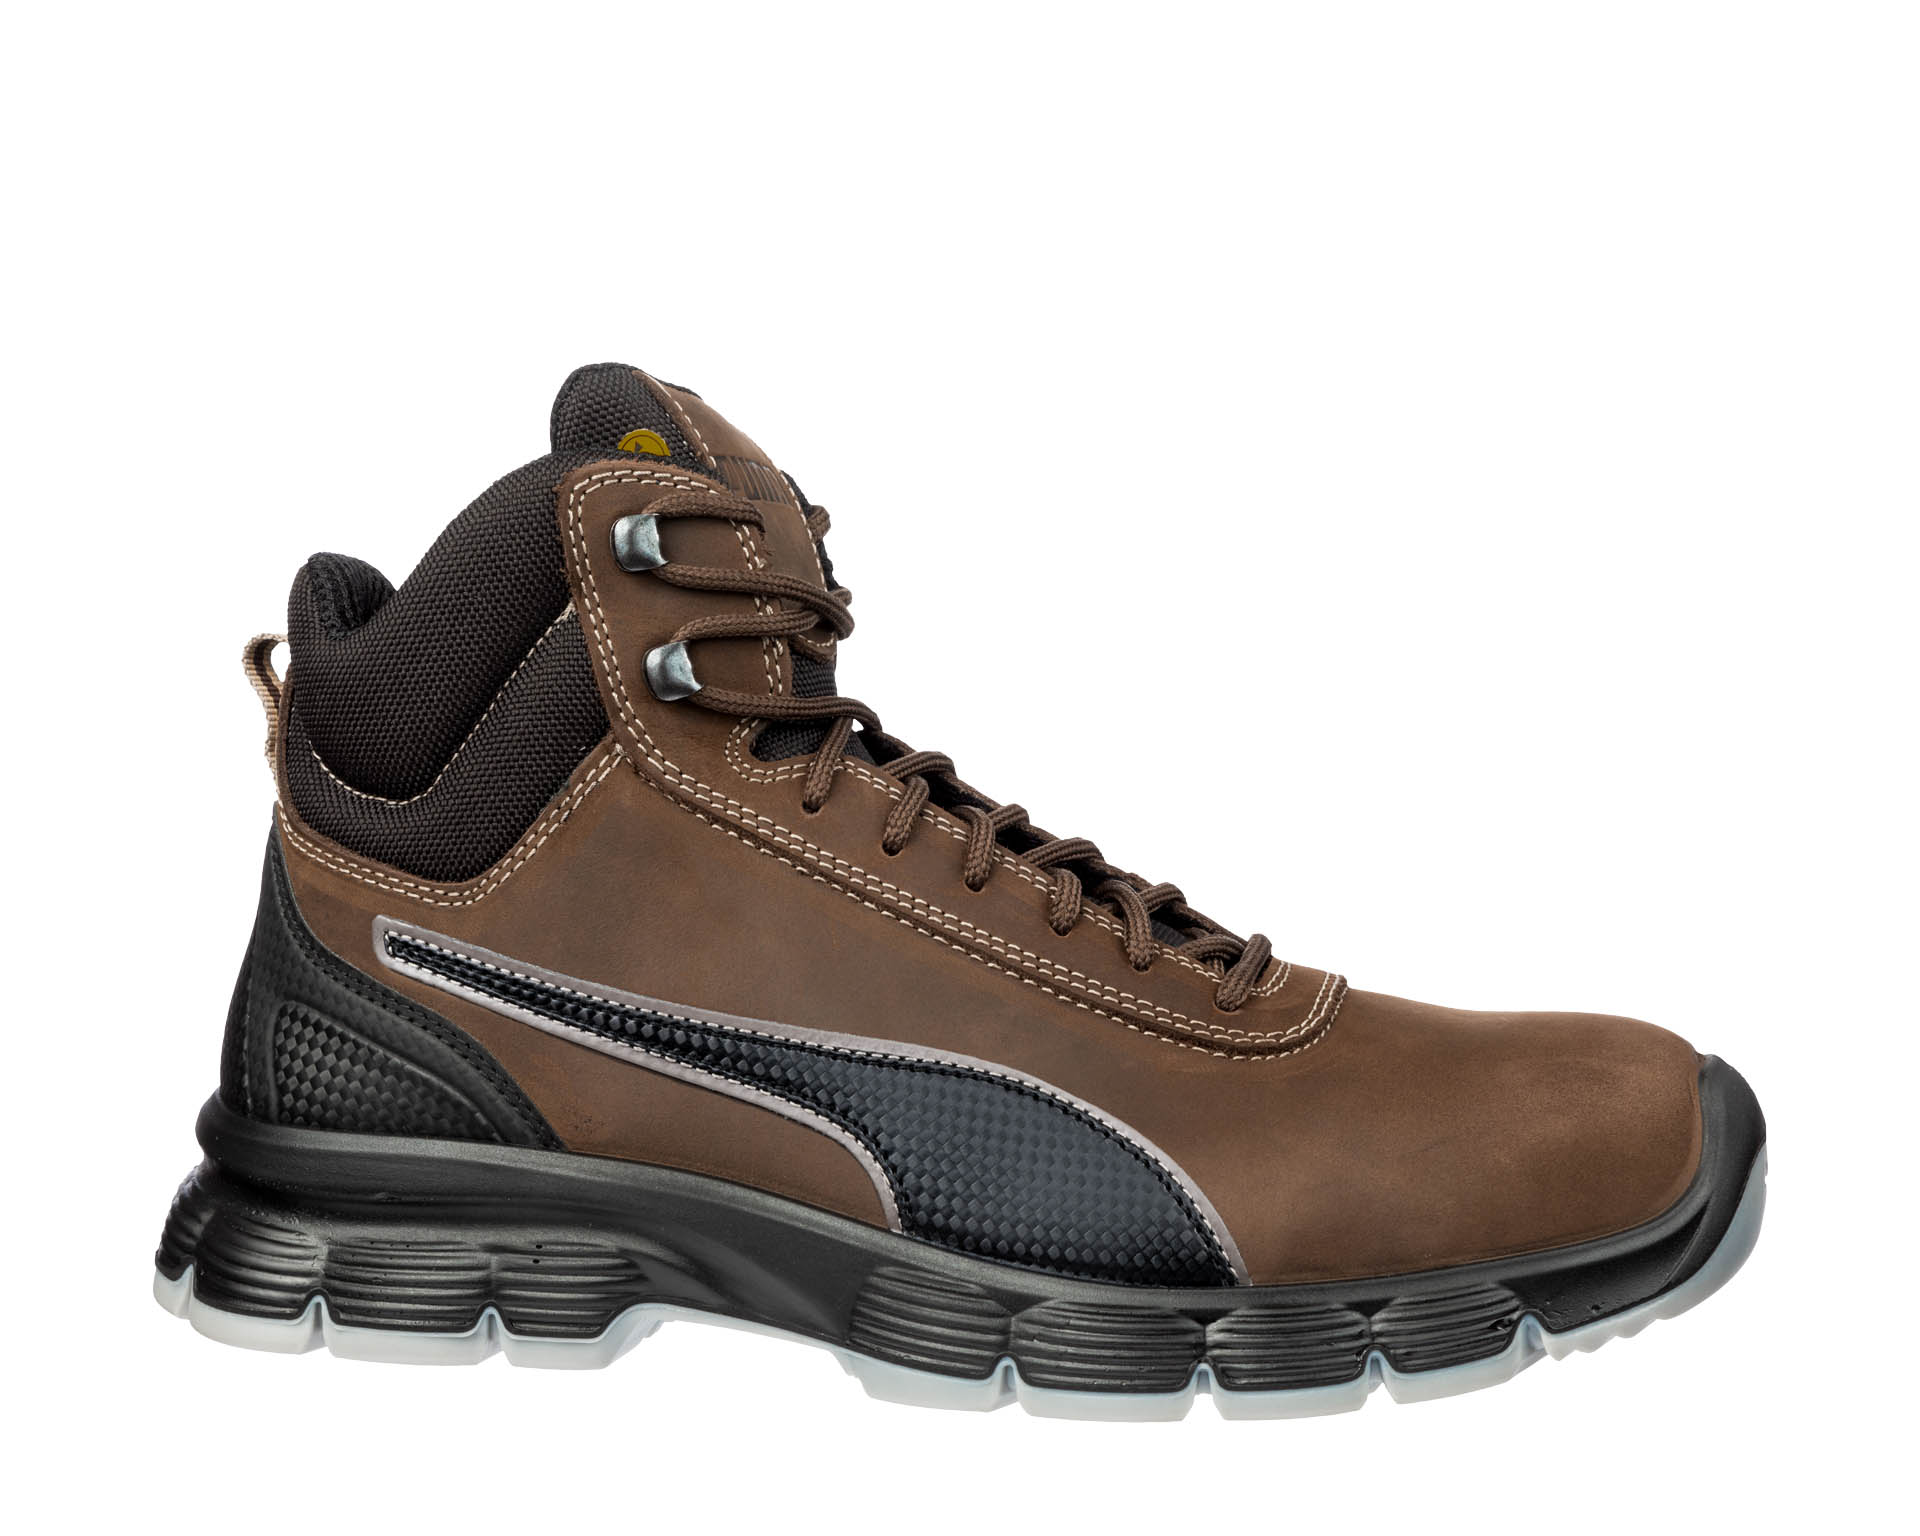 Puma S3 PUMA BROWN SAFETY SRC | MID safety ESD English Safety shoes CONDOR